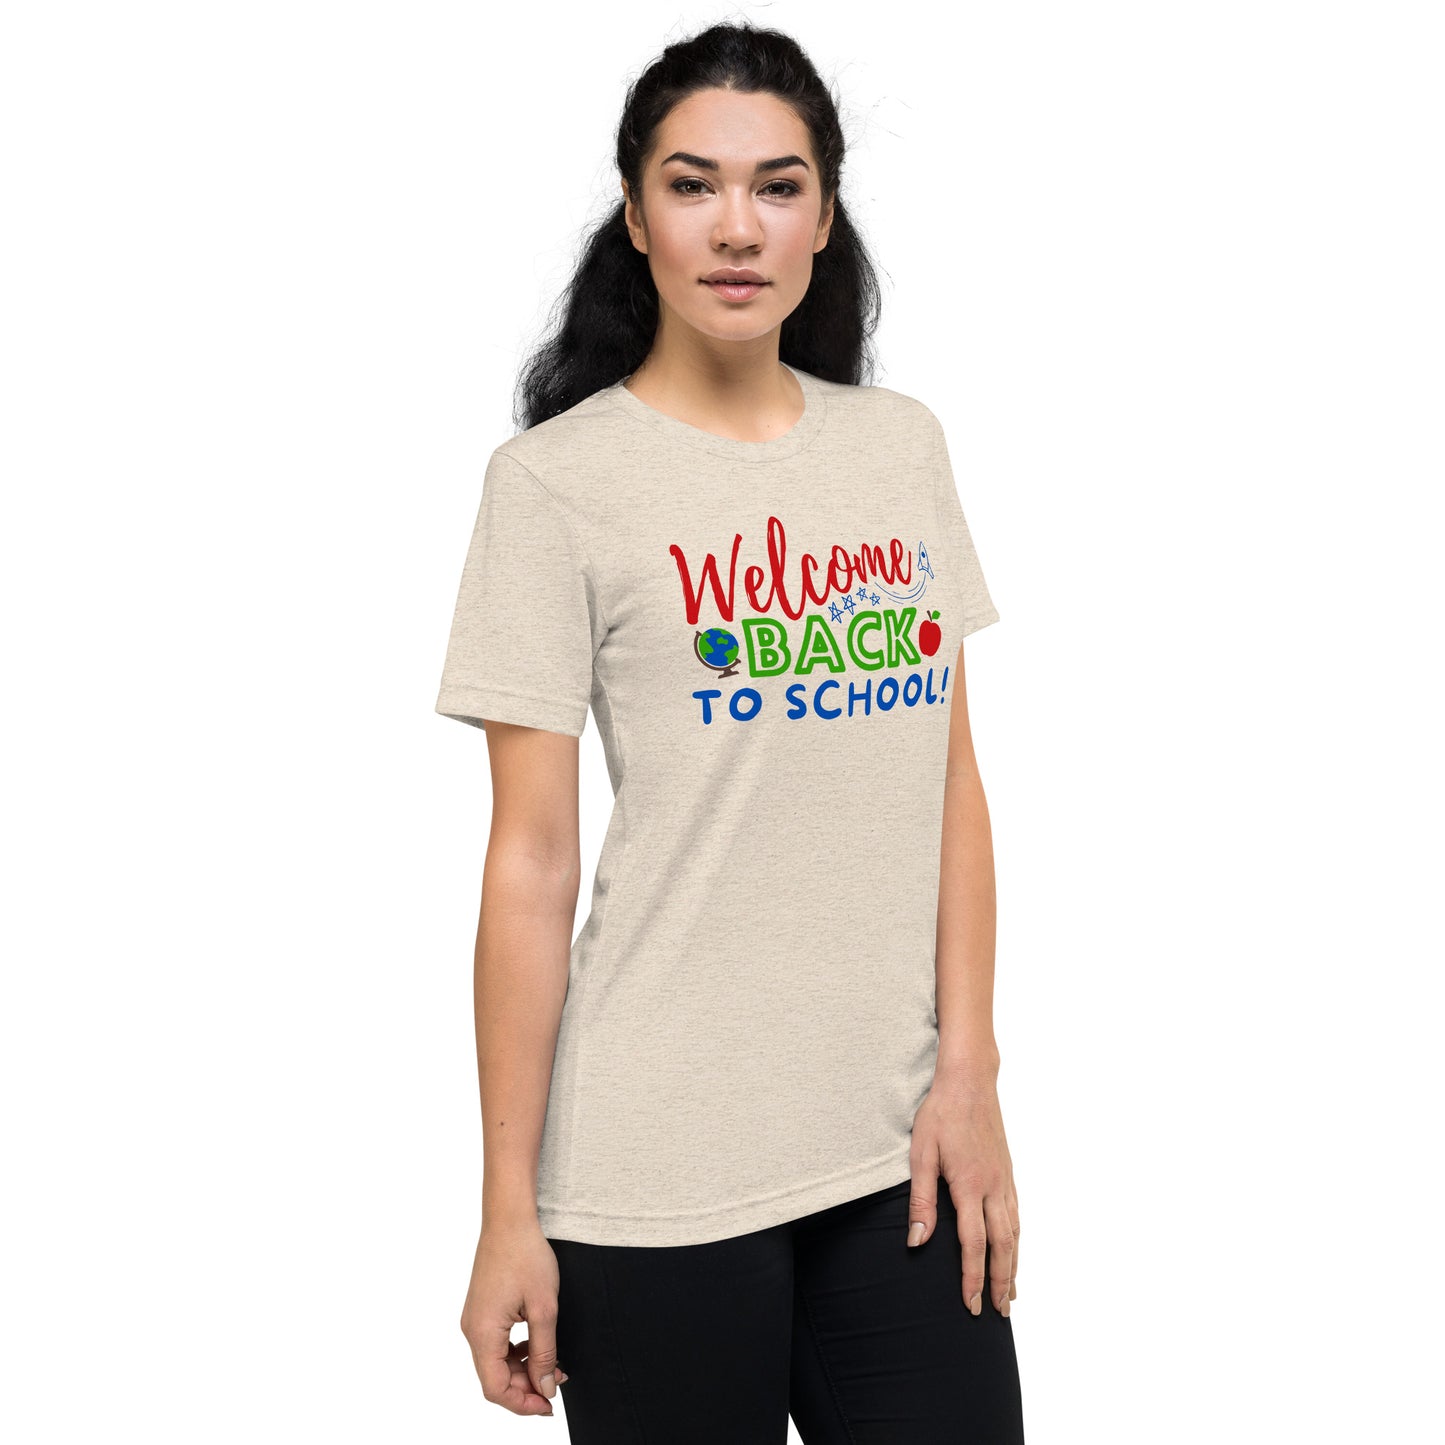 Welcome Back to School Adult Unisex T-Shirt